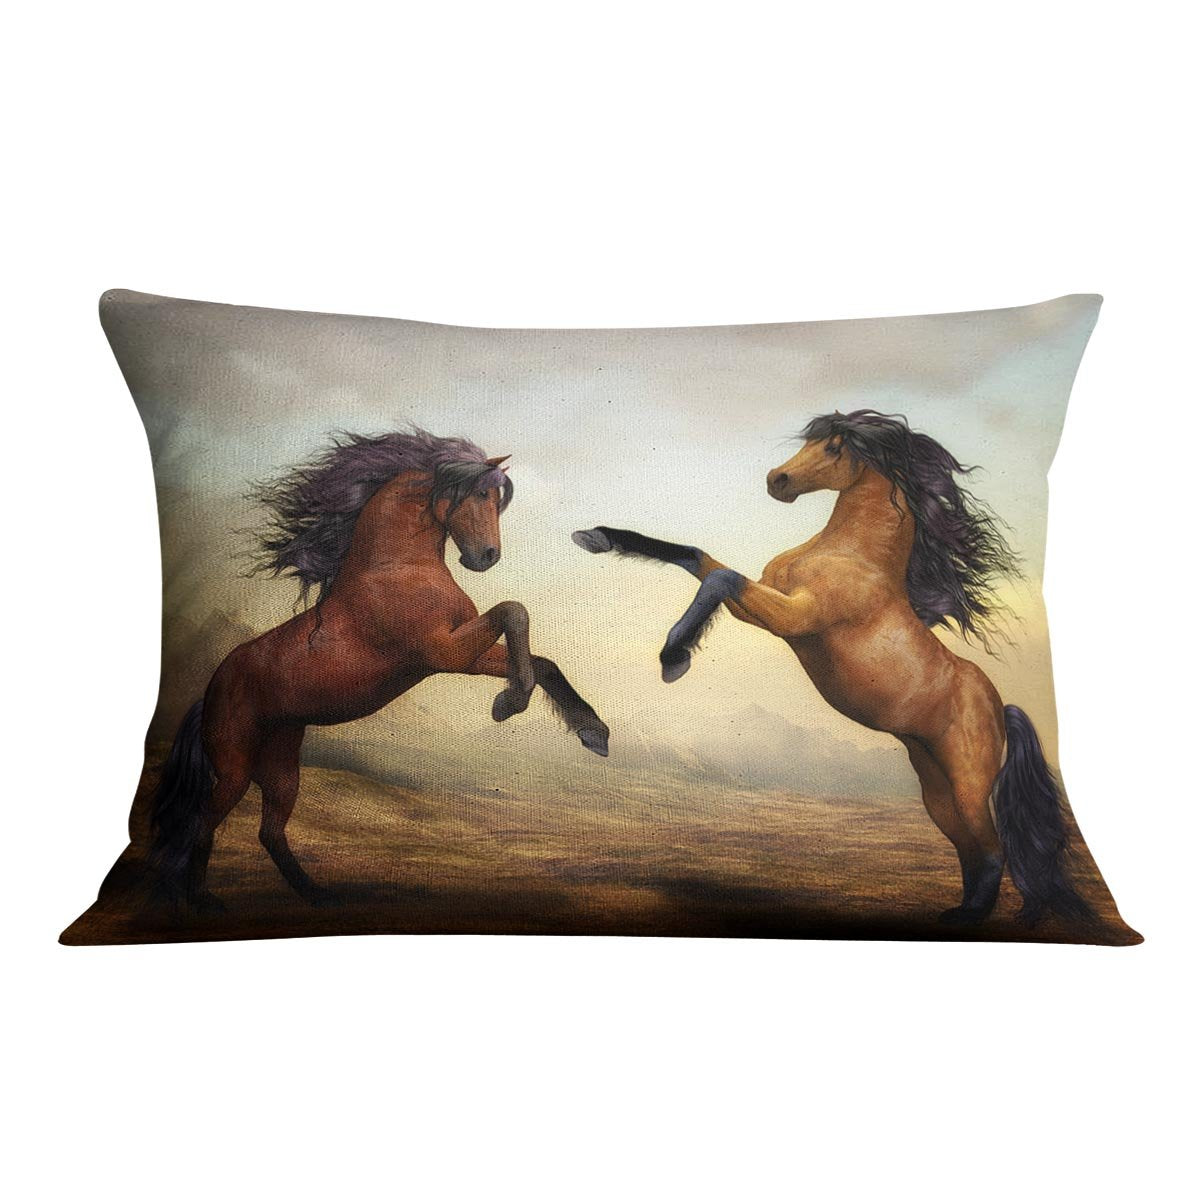 The Two Horses Cushion